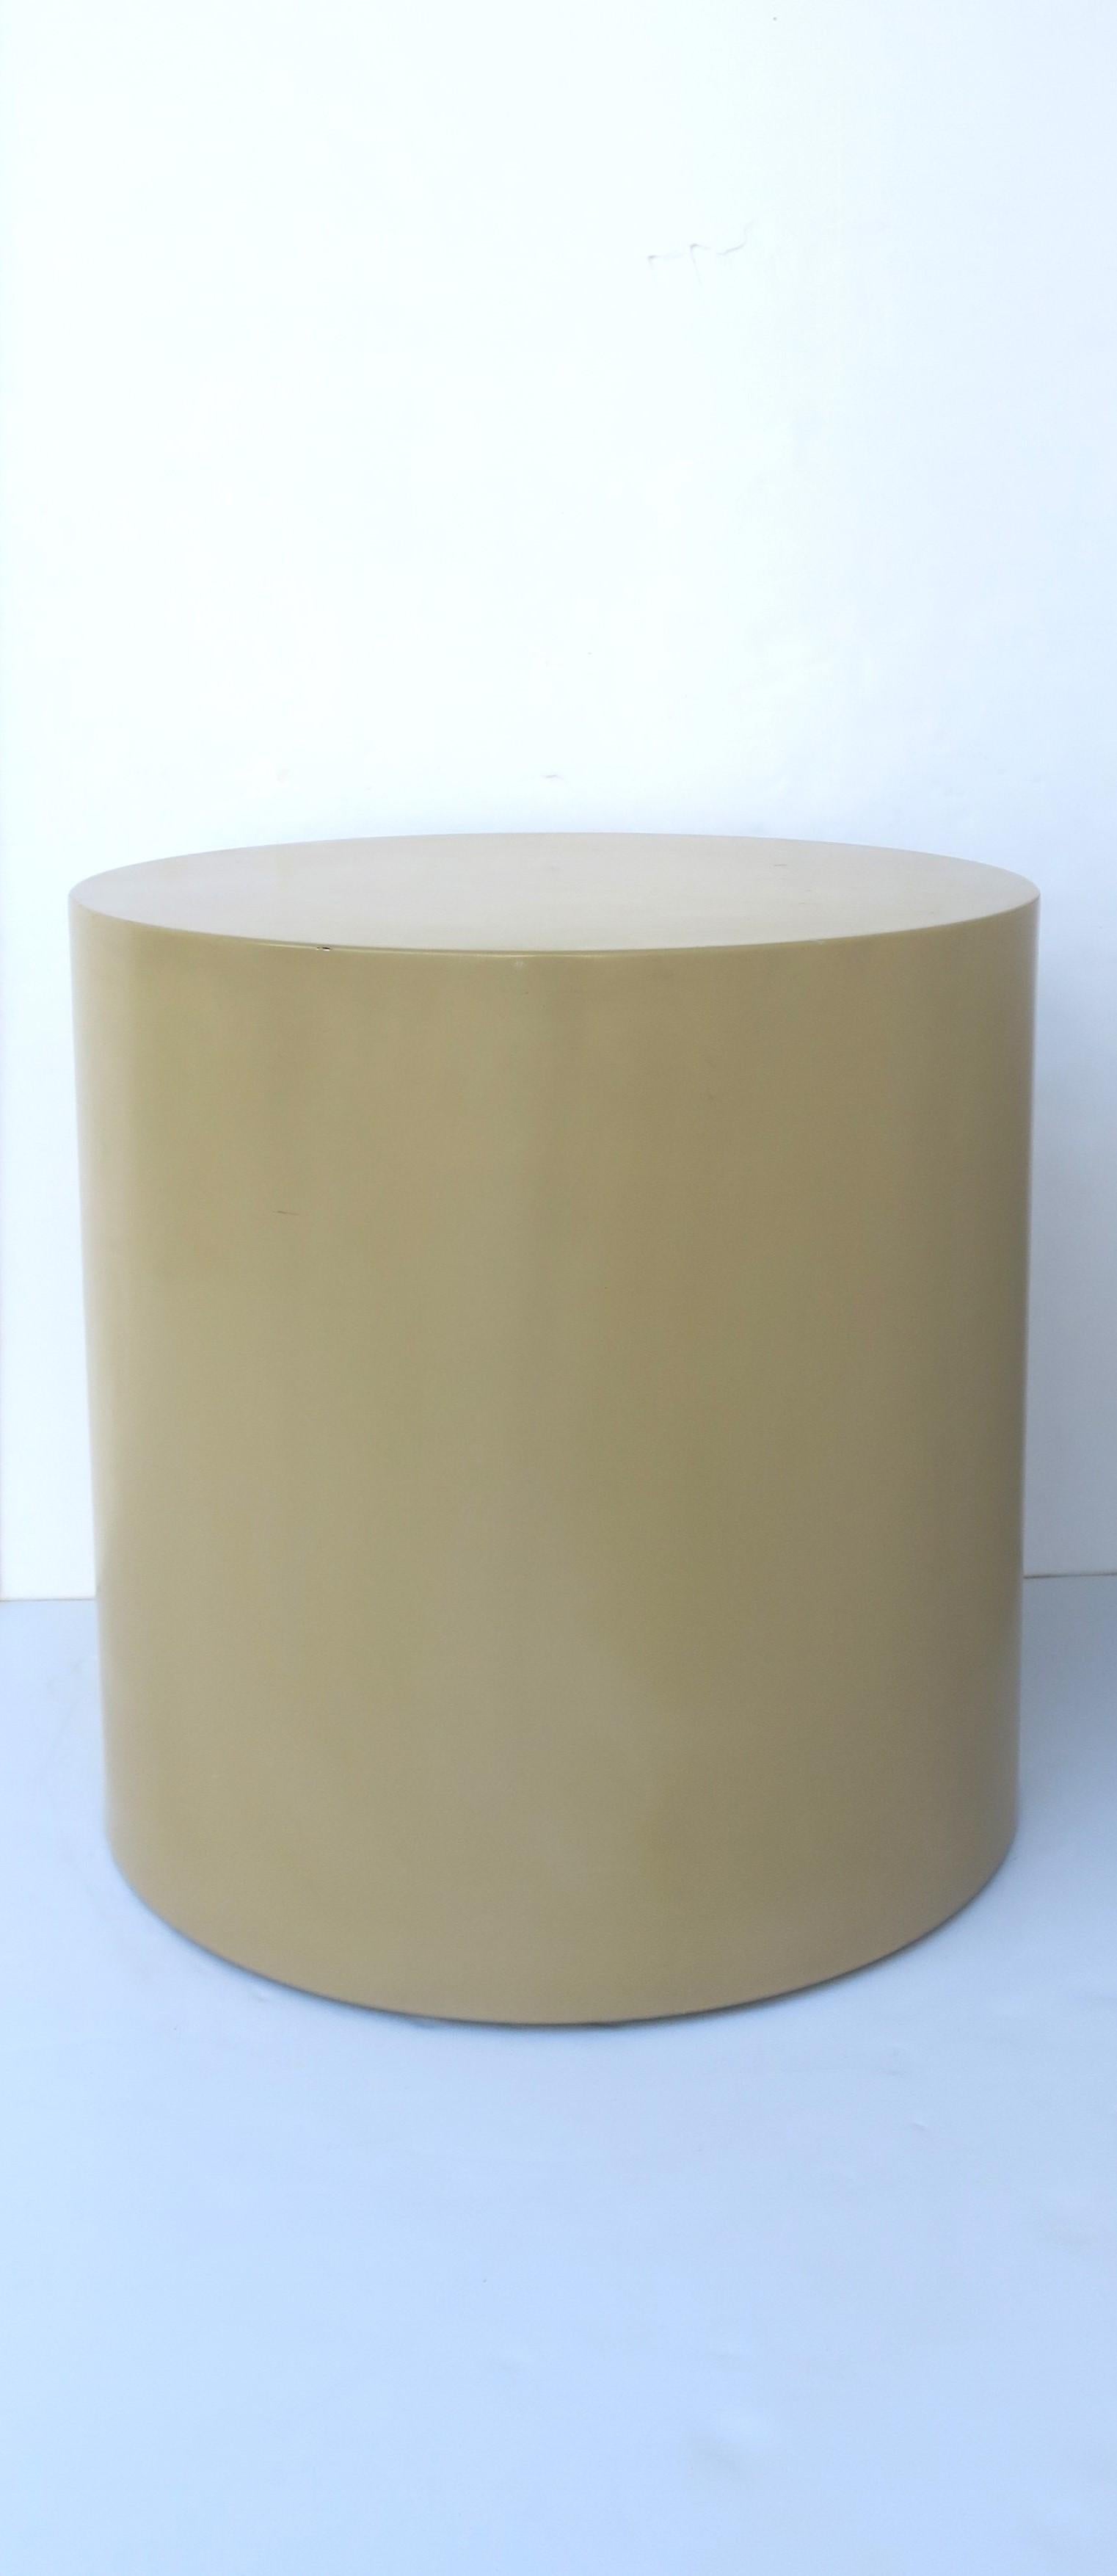 A round pedestal drum drinks, side, or end table in the Modern style, attributed to designer Paul Mayen for Habitat International furniture, circa late-20th century. Table is a neutral tan enamel hue. A great piece for many interiors with its